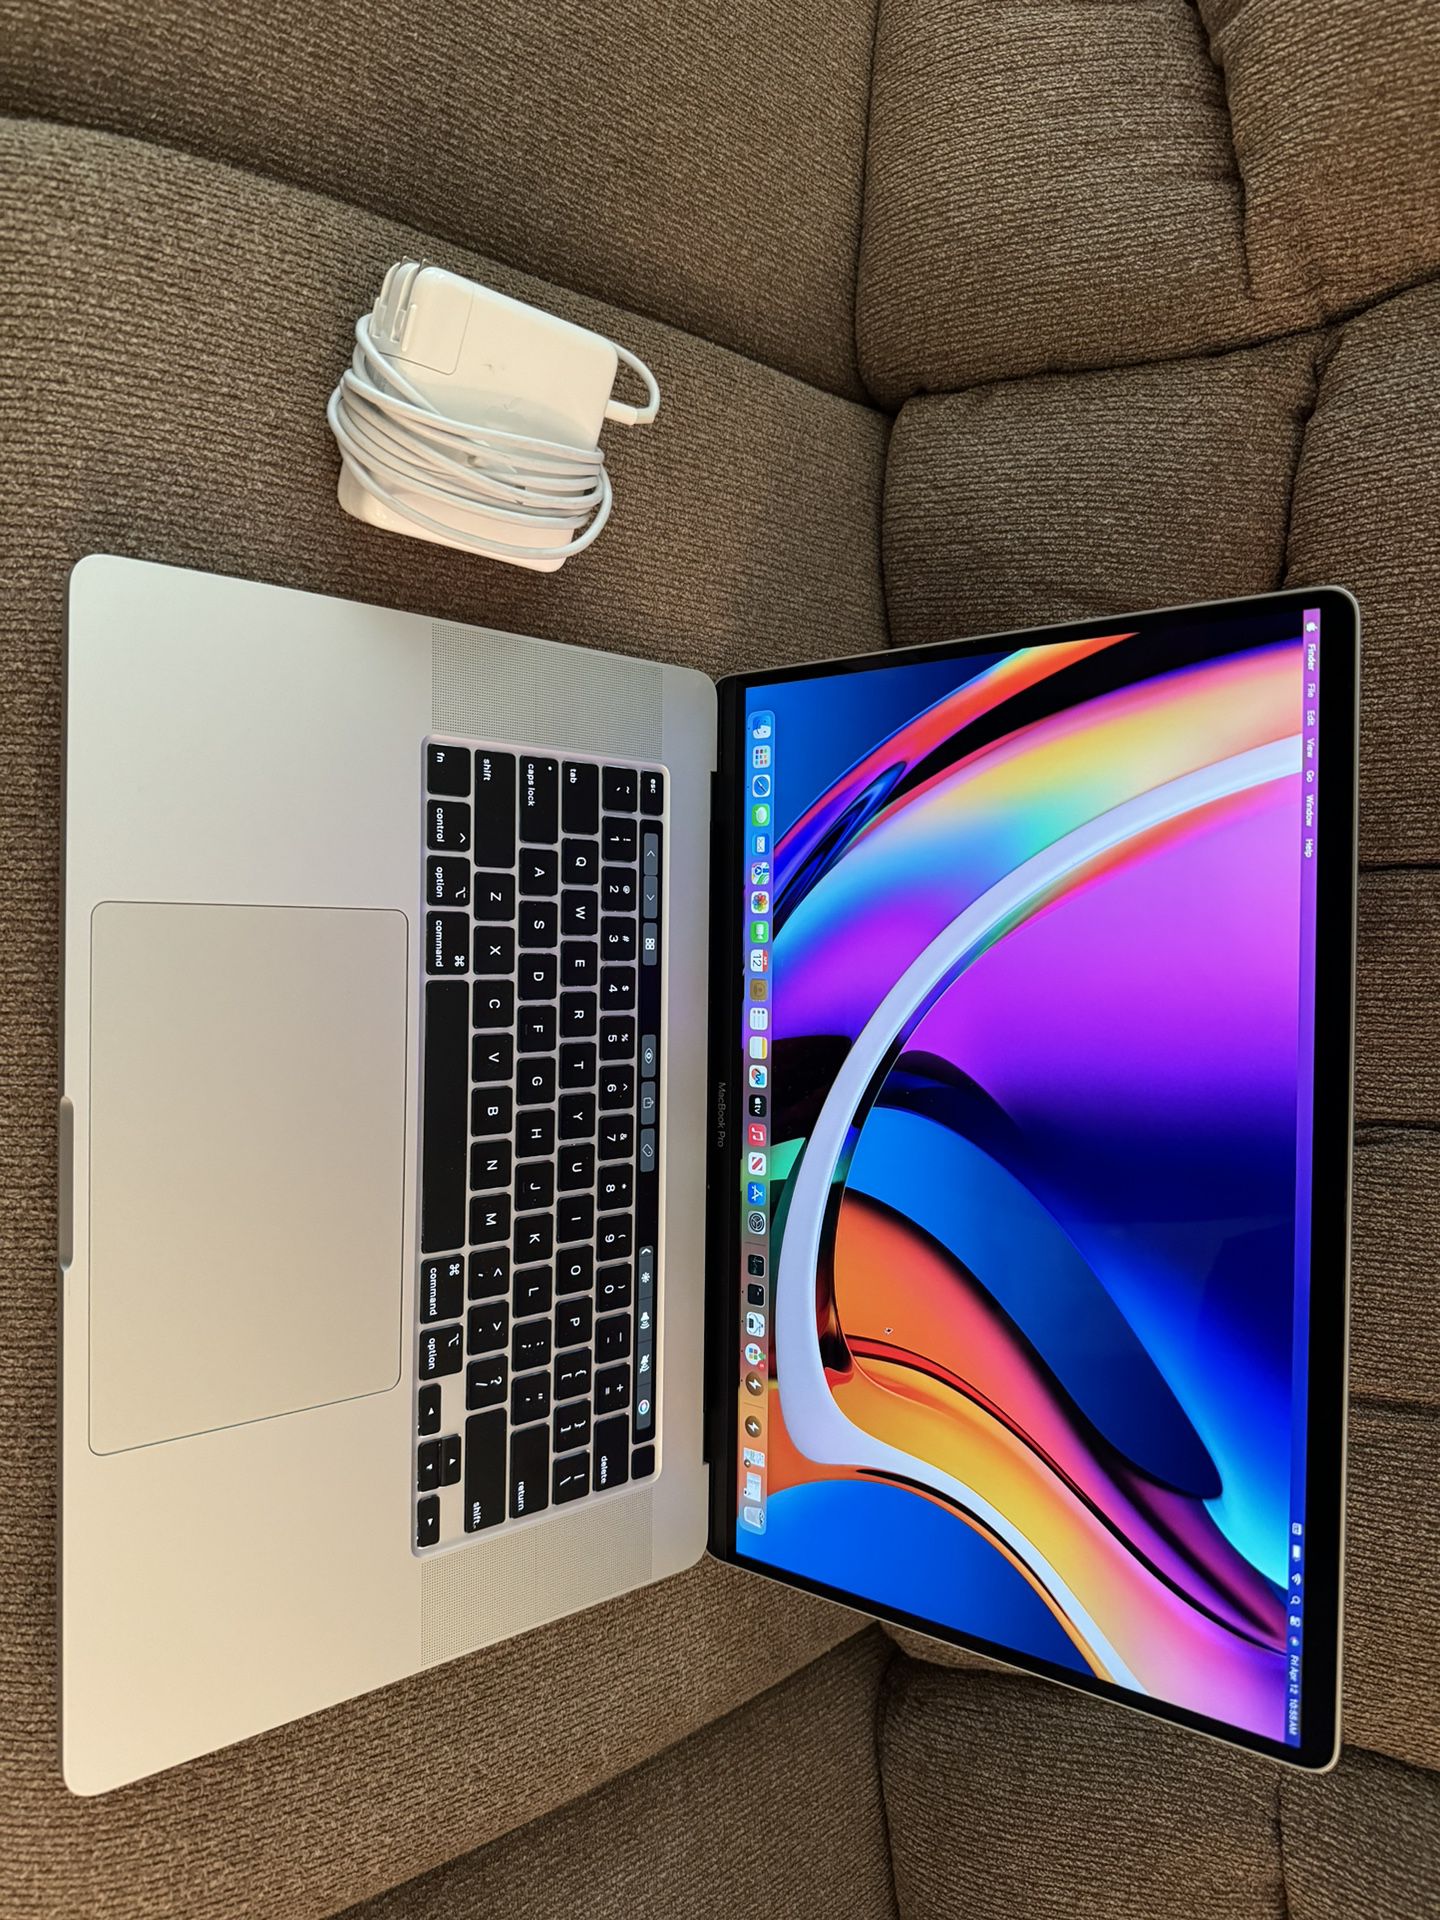 2019/2020 MacBook Pro 16”, i7 2.6ghz 6 Cores, 32gb ram,512gb.4GB graphic,95 Battery Cycles, Fast